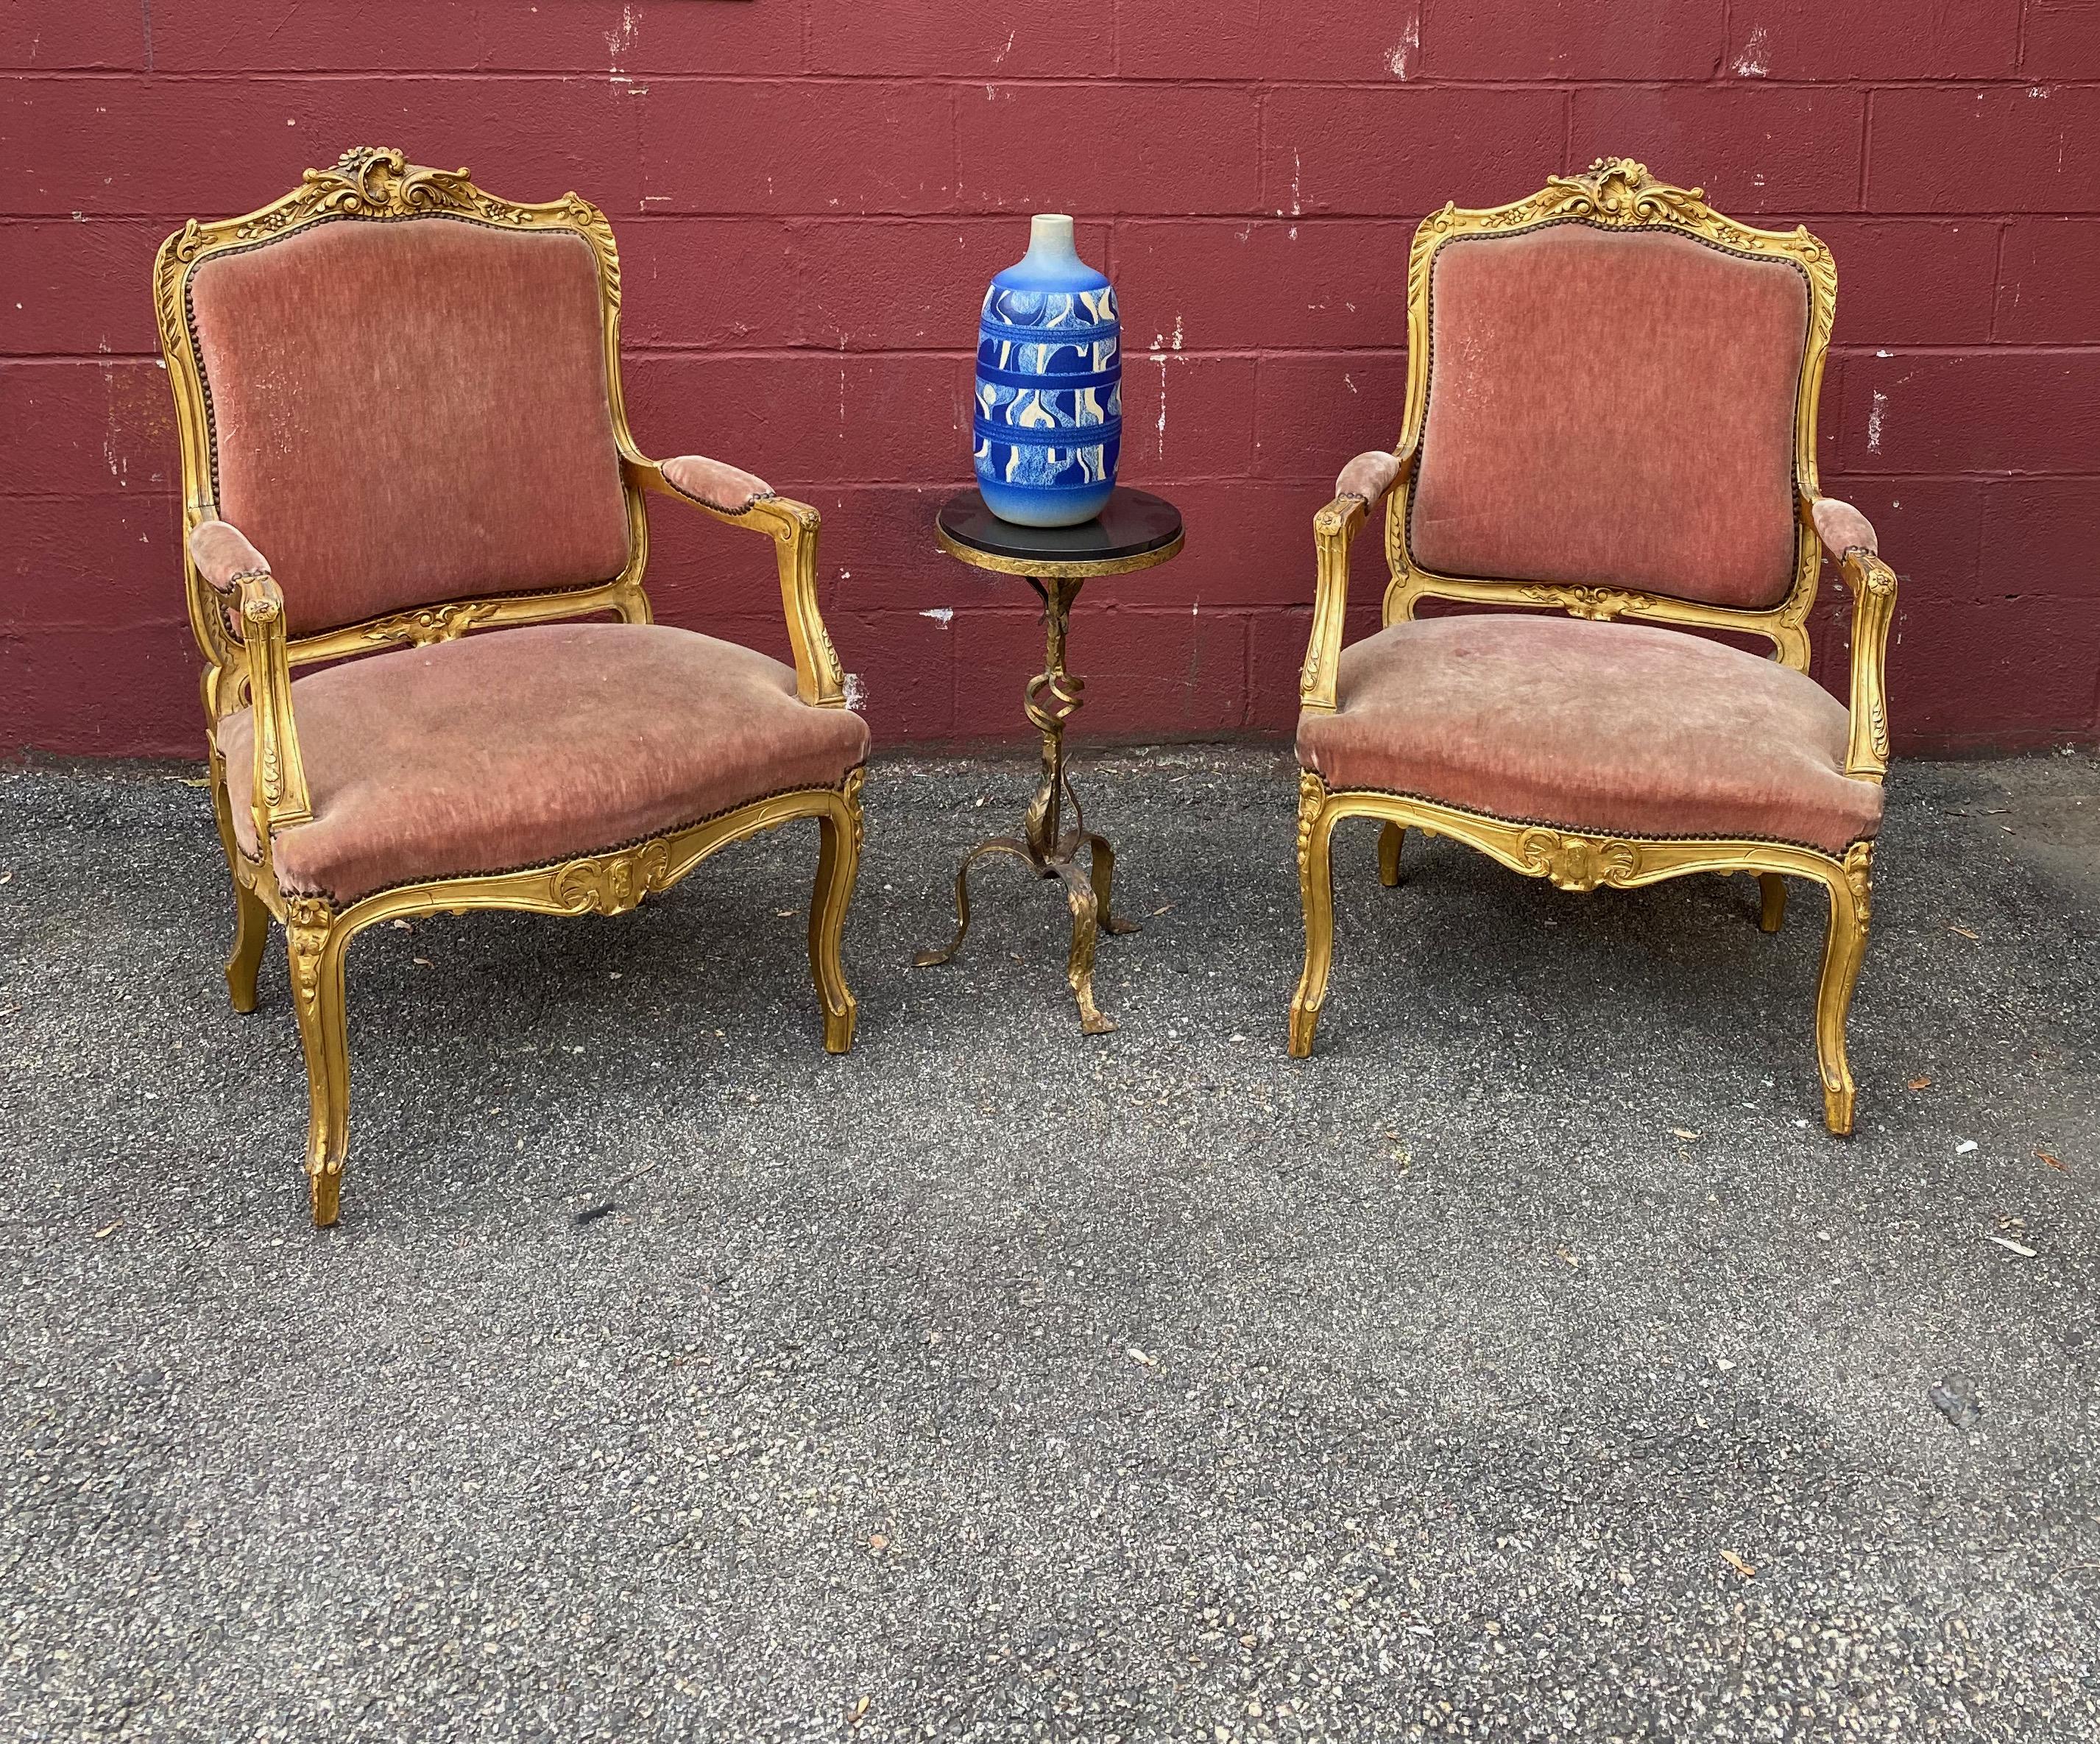 Pair of French late 19th century Louis XV style armchairs in a gilt finish with hand carved decorations. The faded distressed velvet is a deep salmon color. 
Fair vintage condition. Fades and stains on fabric, and the arms can use tightening.
